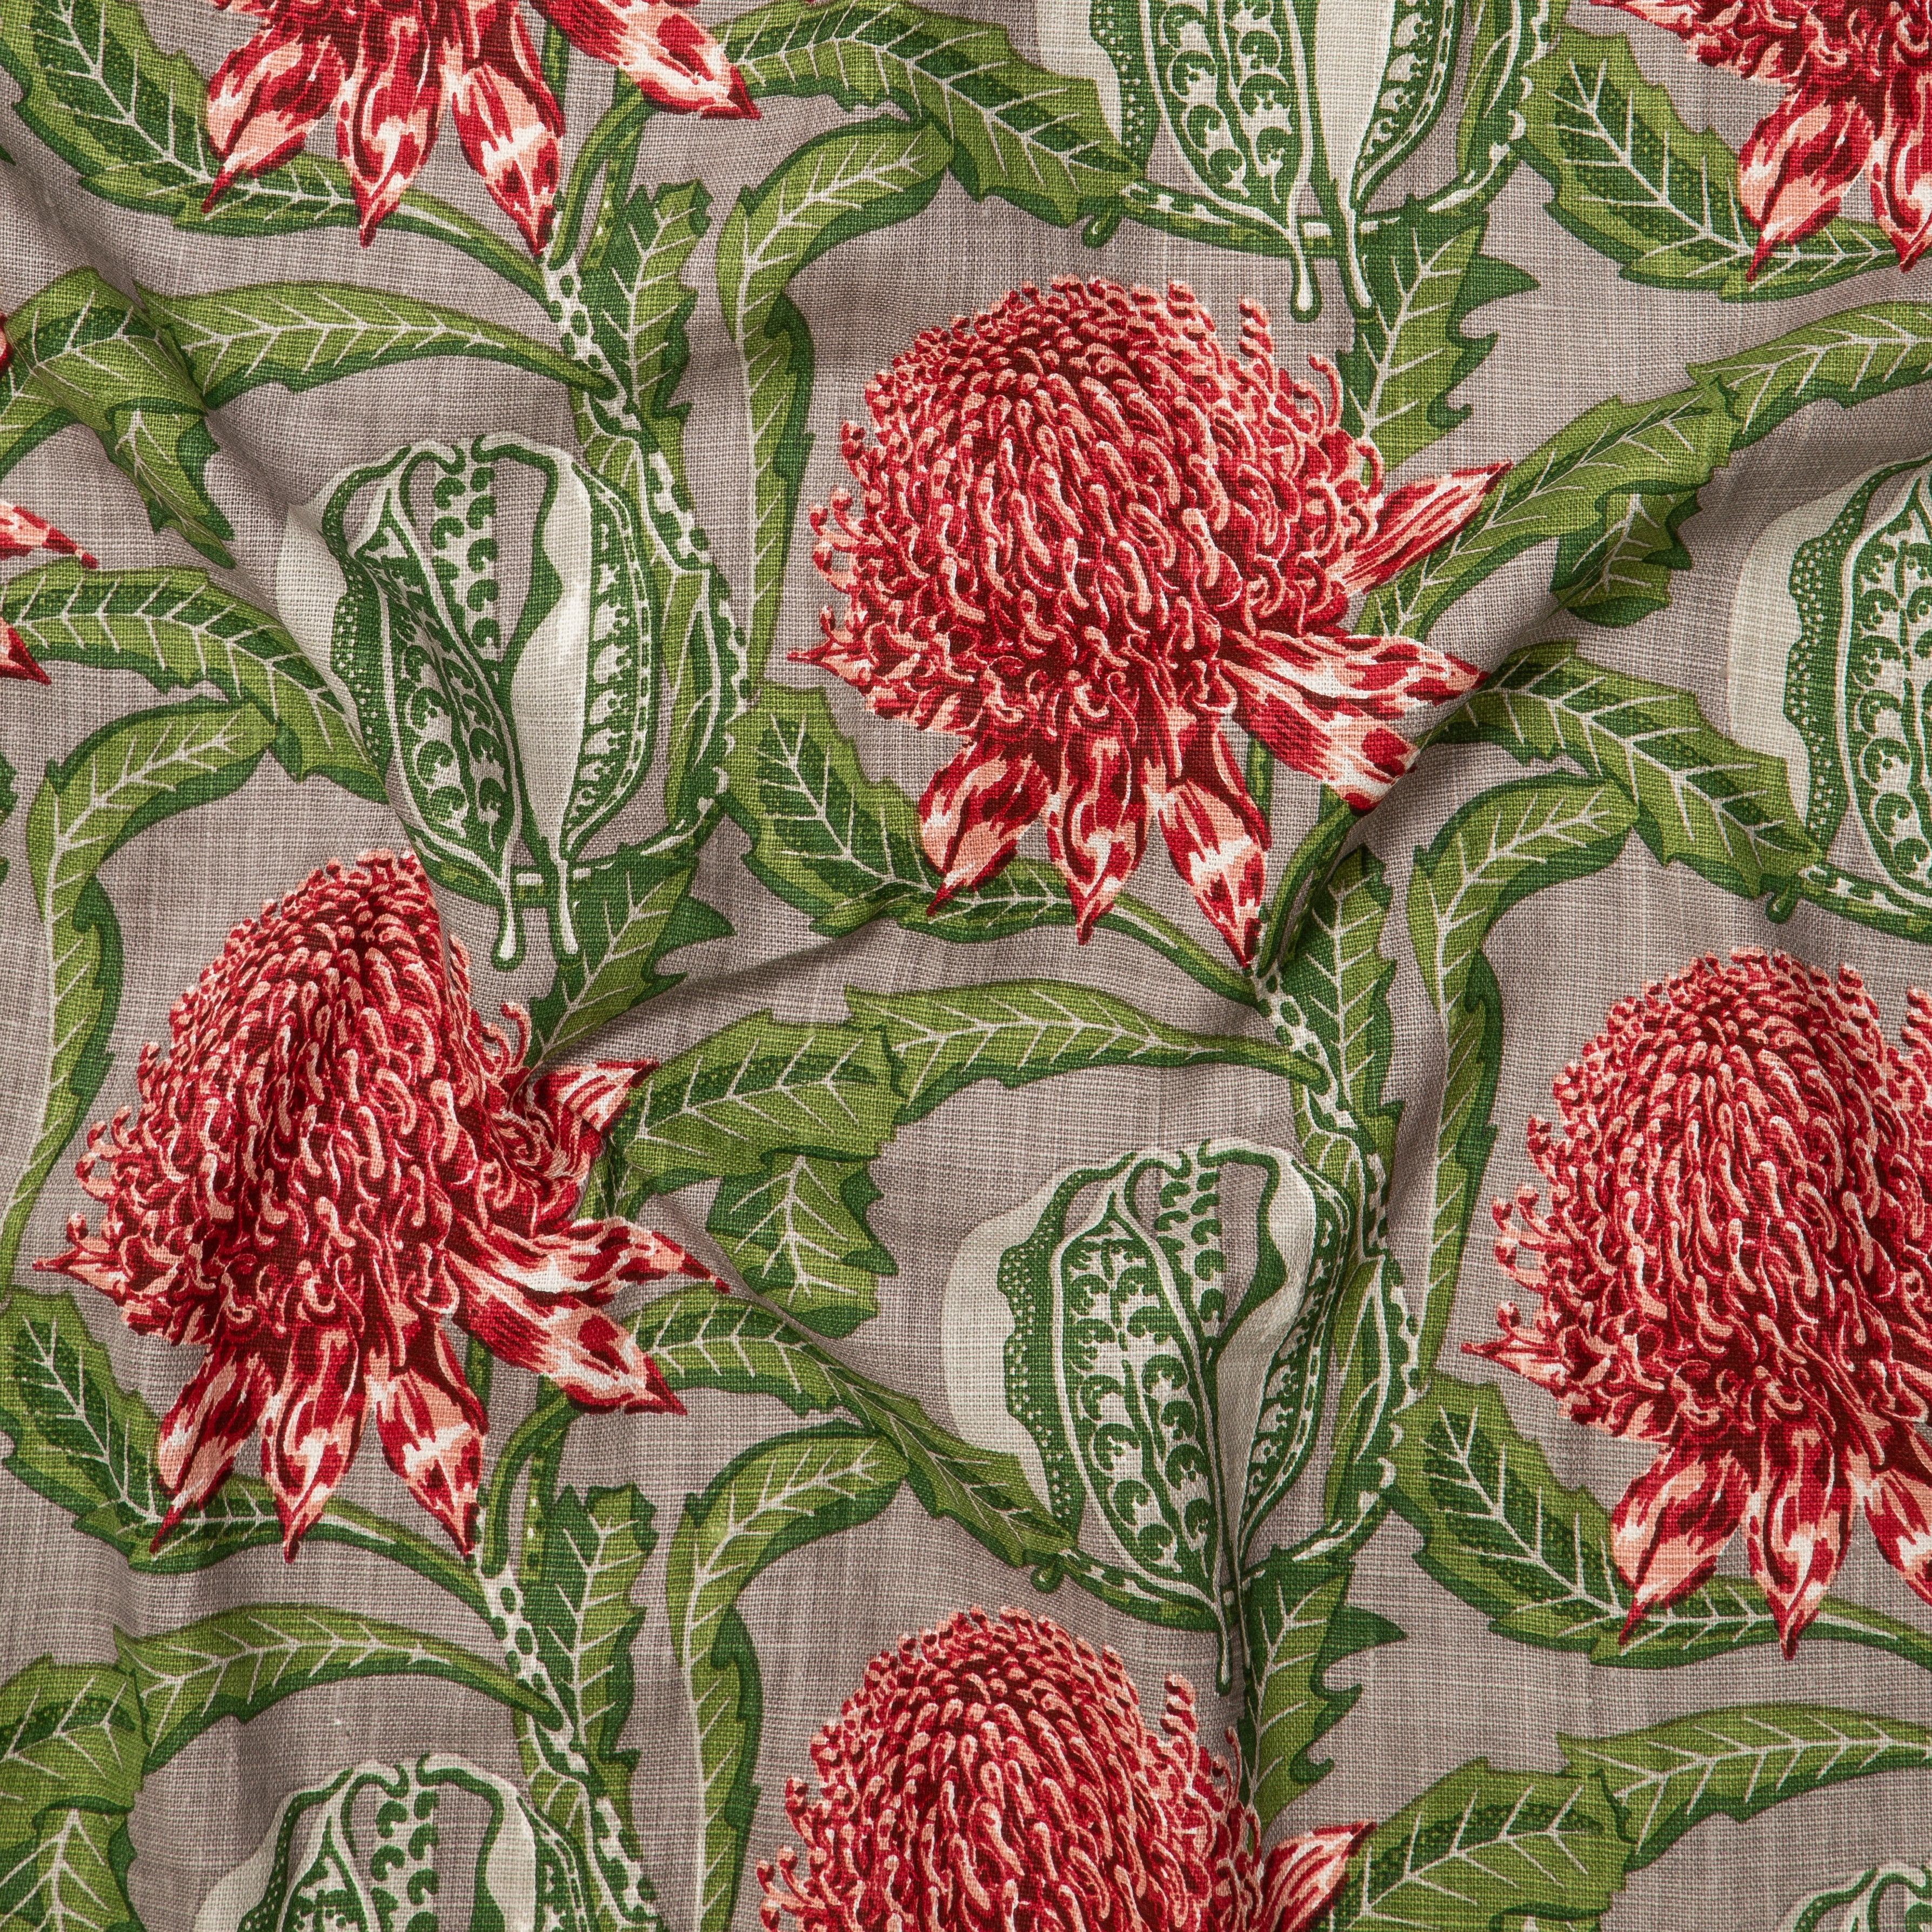 Draped fabric in a large-scale floral print in shades of green and red on a gray field.